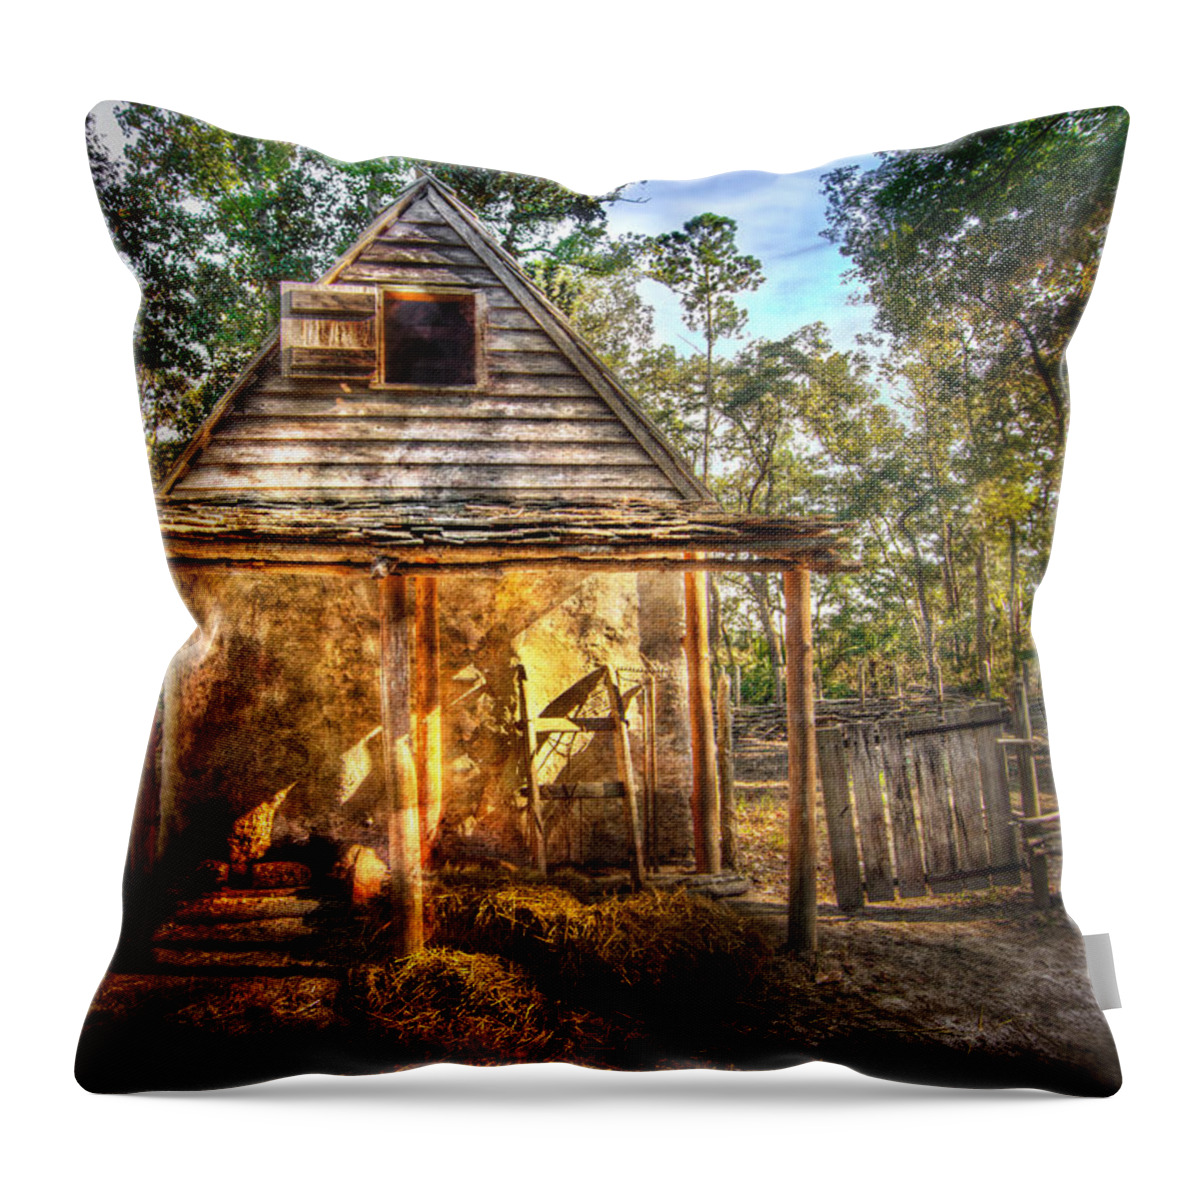 Wormsloe Throw Pillow featuring the photograph Rustic Cabin by Mark Andrew Thomas